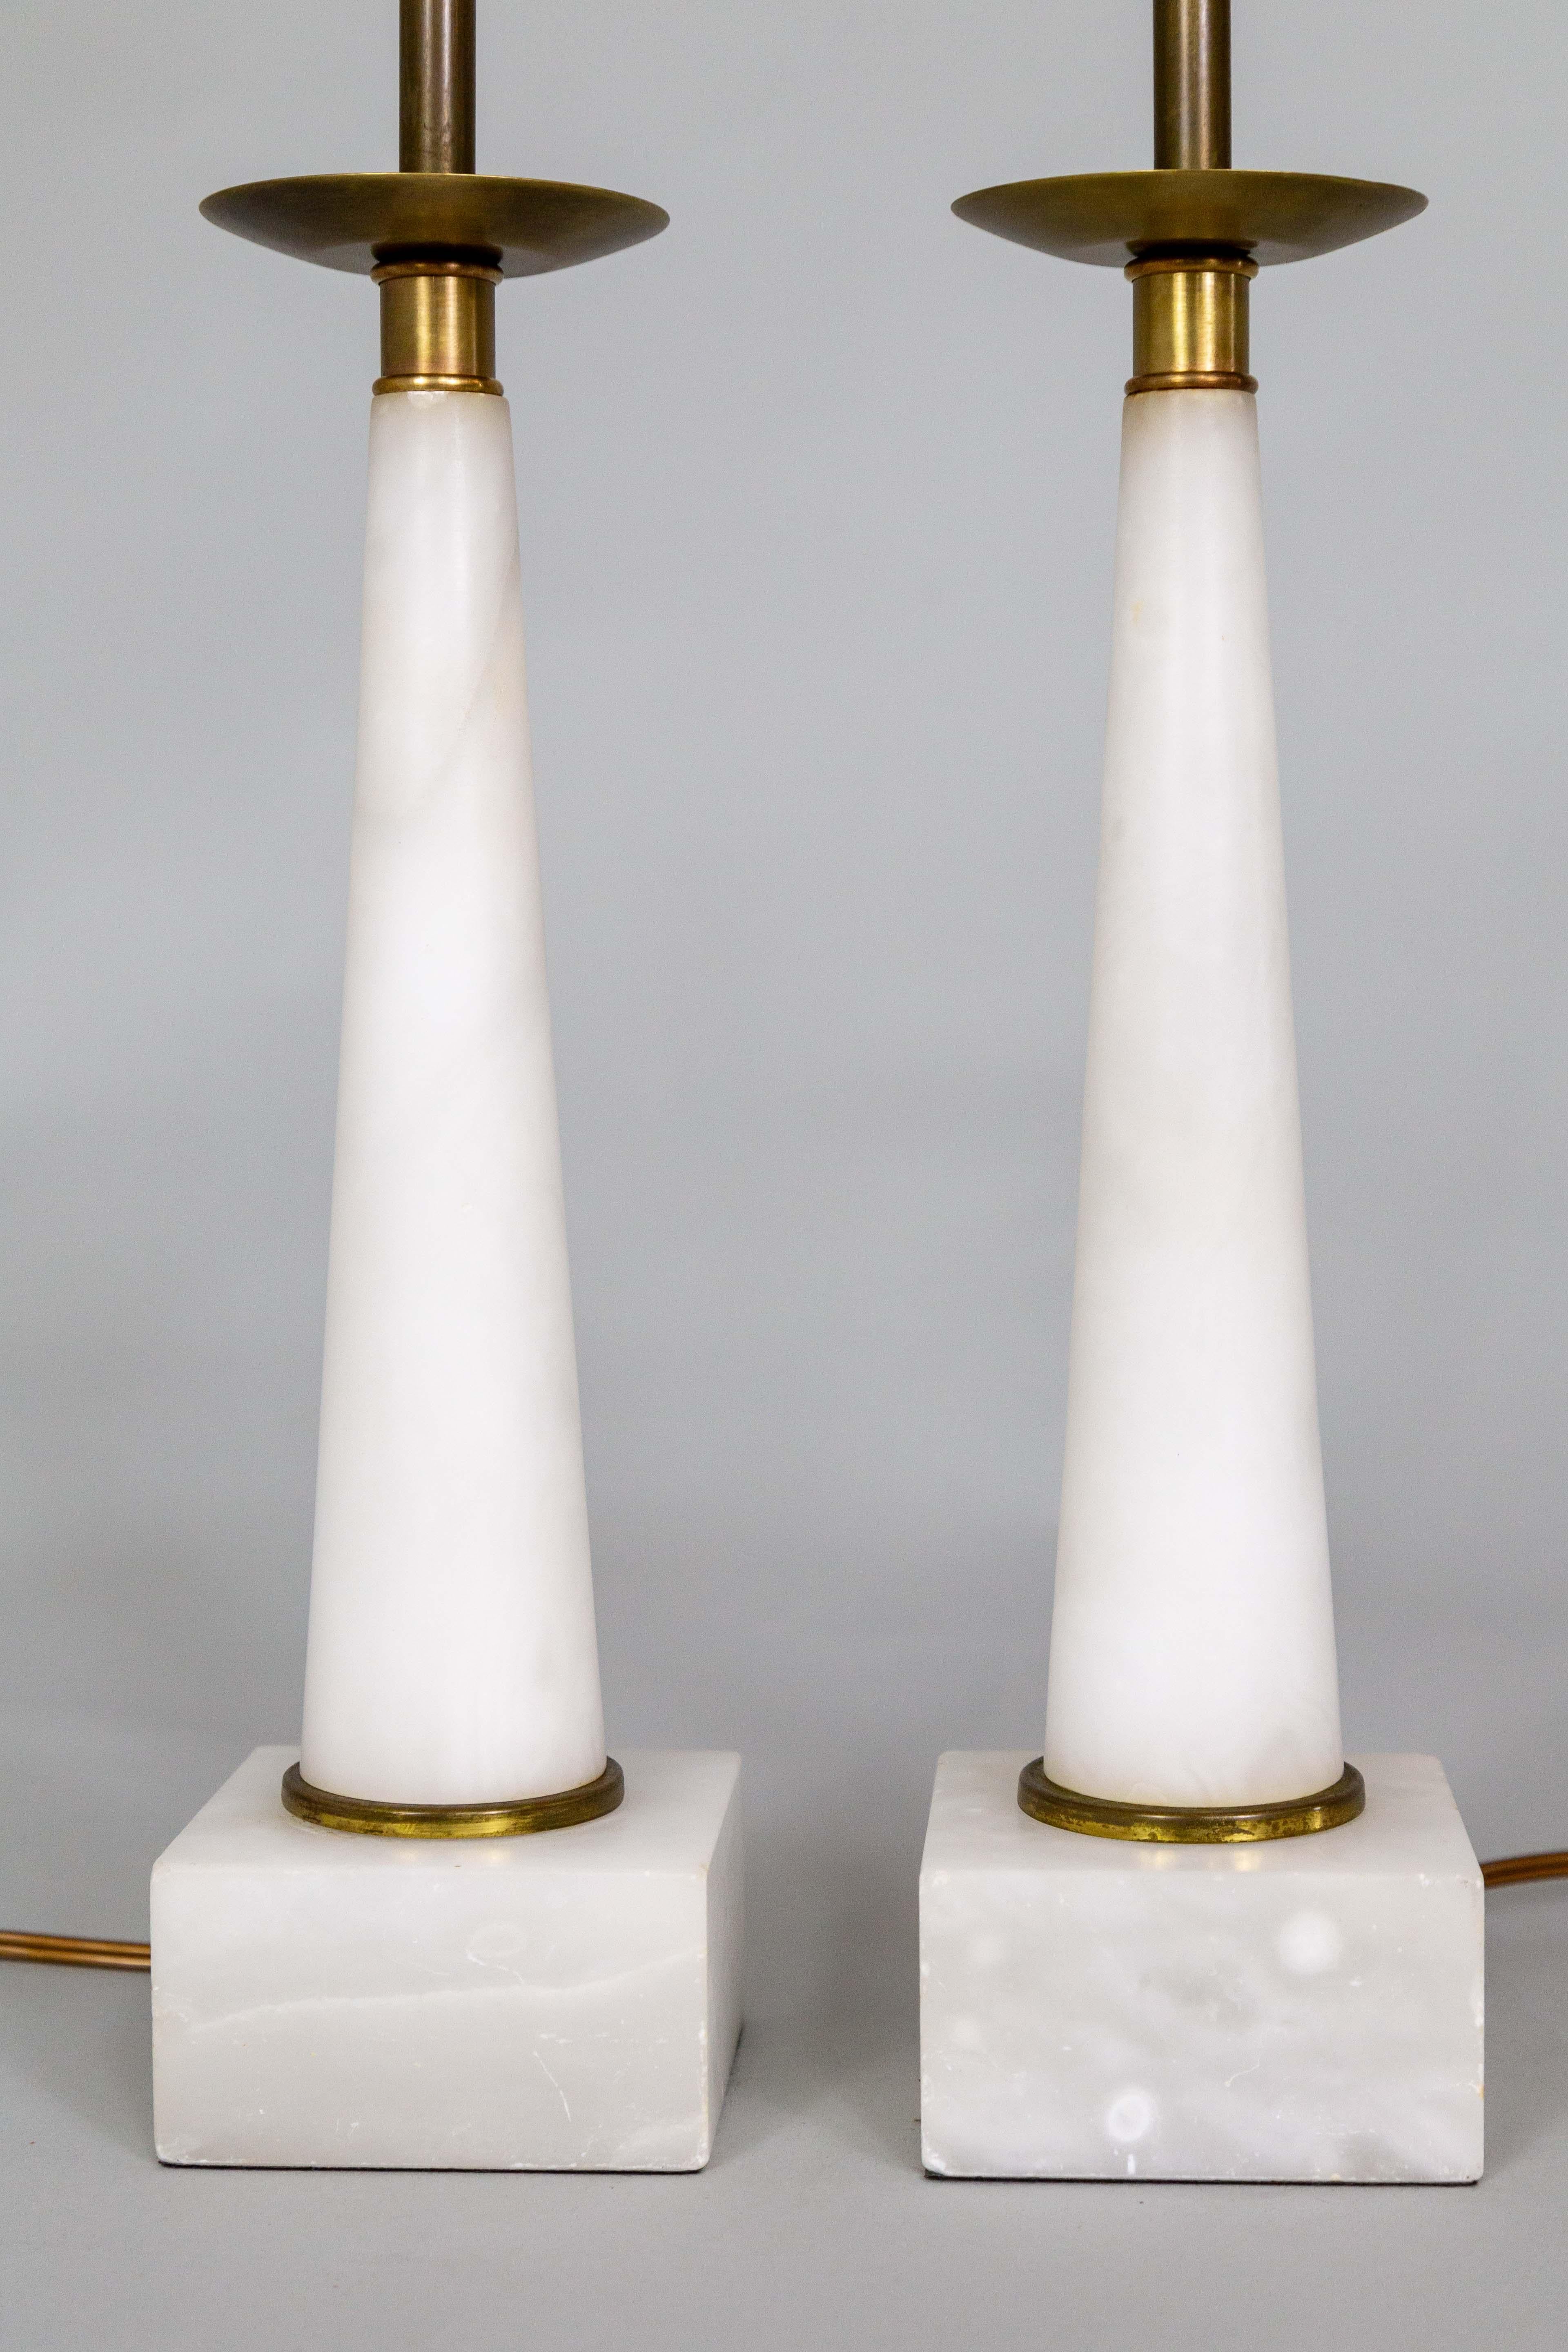 A pair of modern, slim candlestick lamps carved from alabaster as conical columns with square bases.  Made in the 1960s in a Tommi Parzinger style. Accented with dark, patinated brass necks and rims at the base. A versatile design that fits many